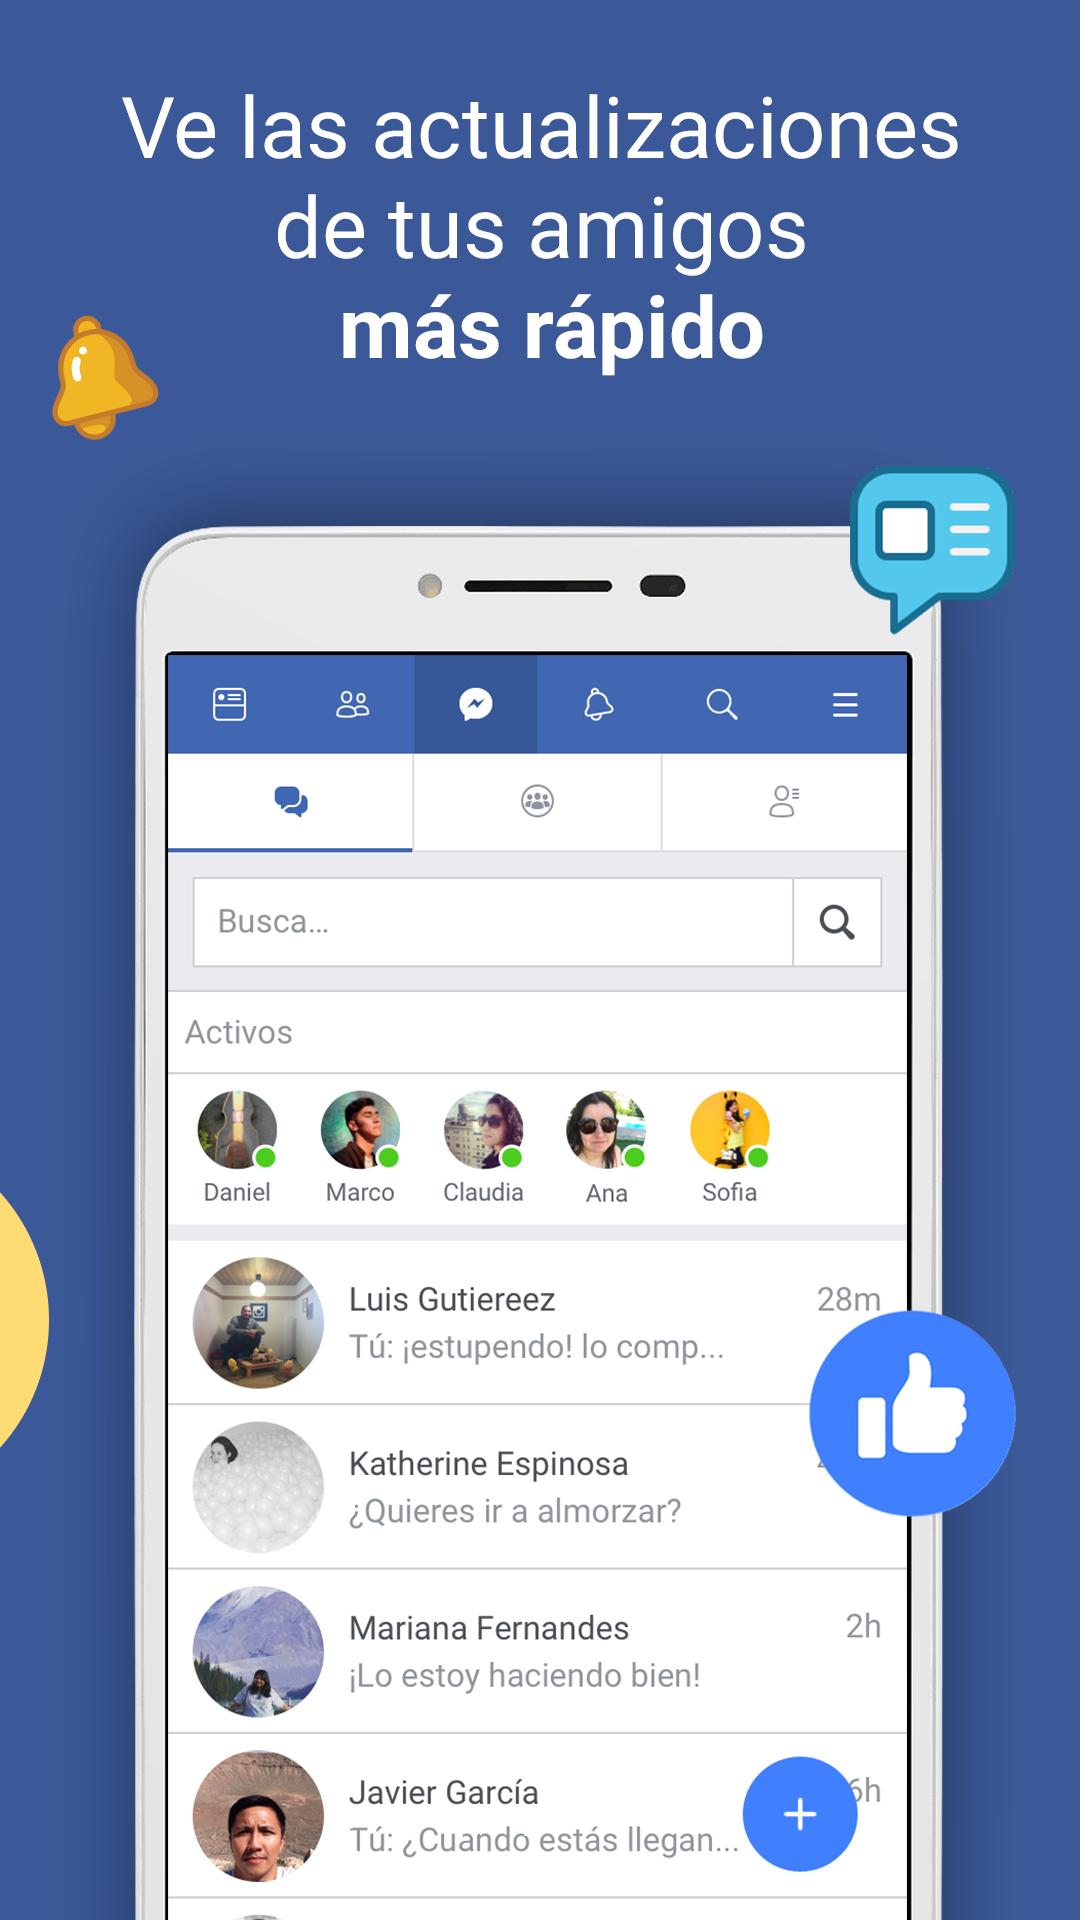 Facebook Lite APK 147.0.0.10.114 Download, never miss any single words